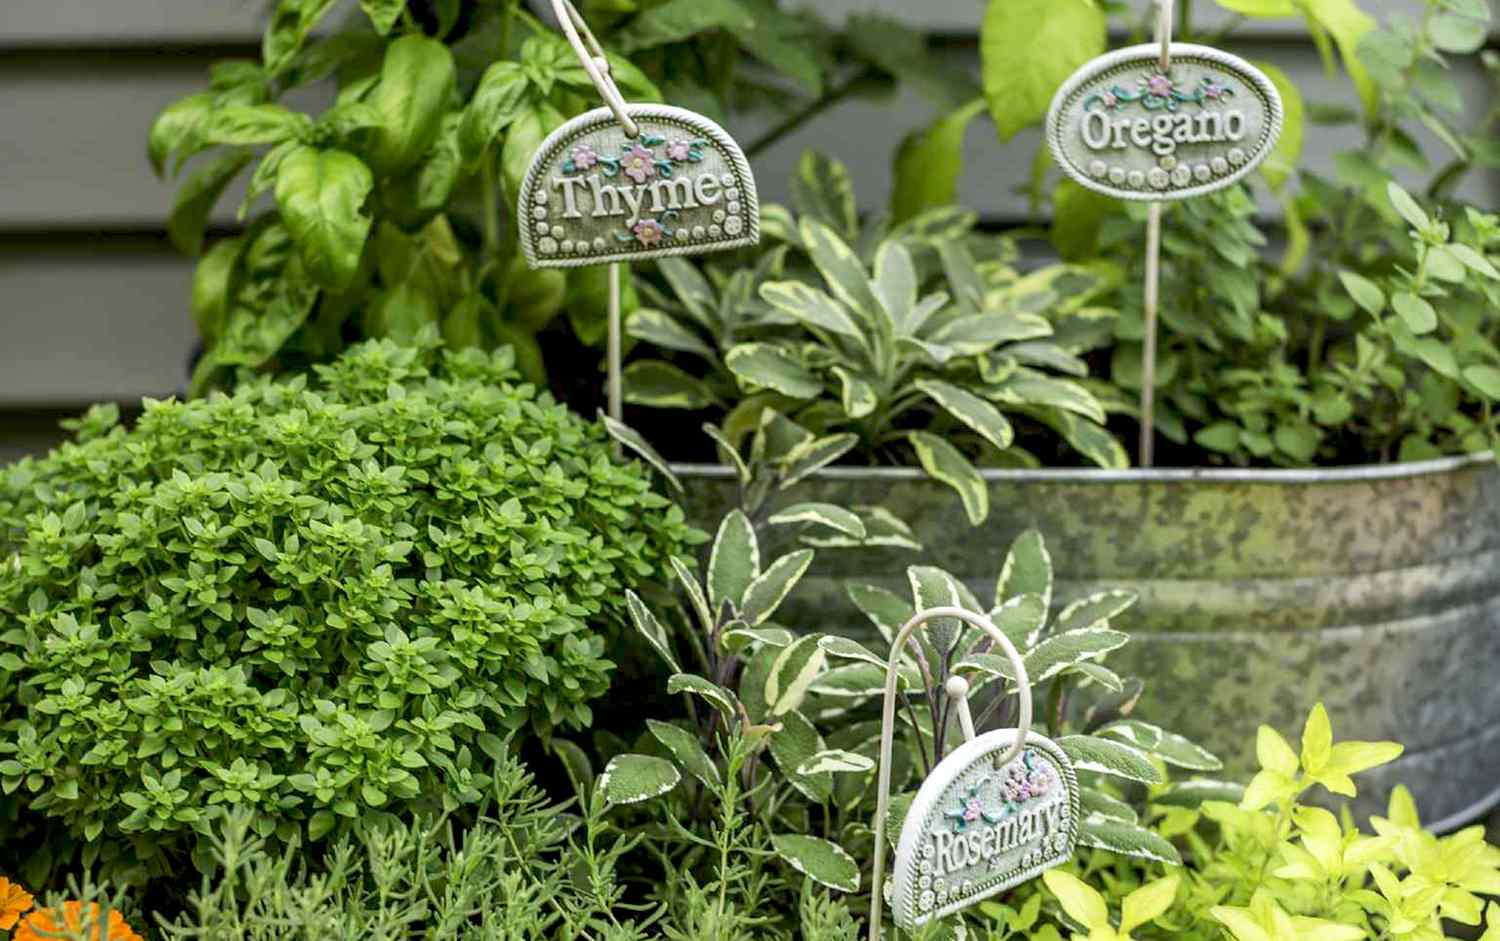 Herb Gardens Are Simple & Cut Costs for Home Cooks | Better Homes & Gardens